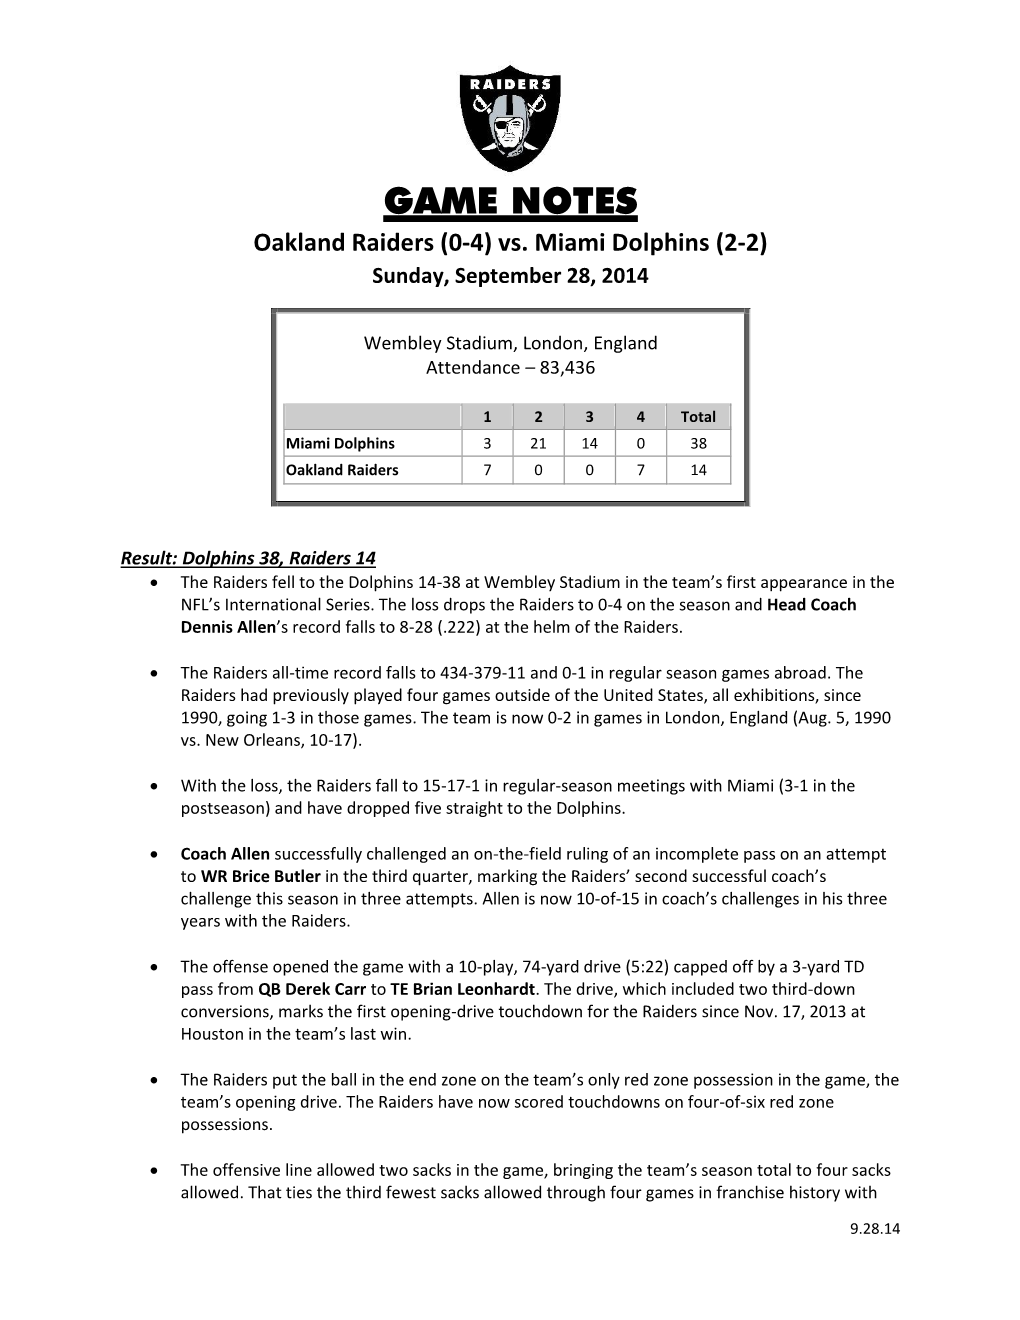 GAME NOTES Oakland Raiders (0-4) Vs